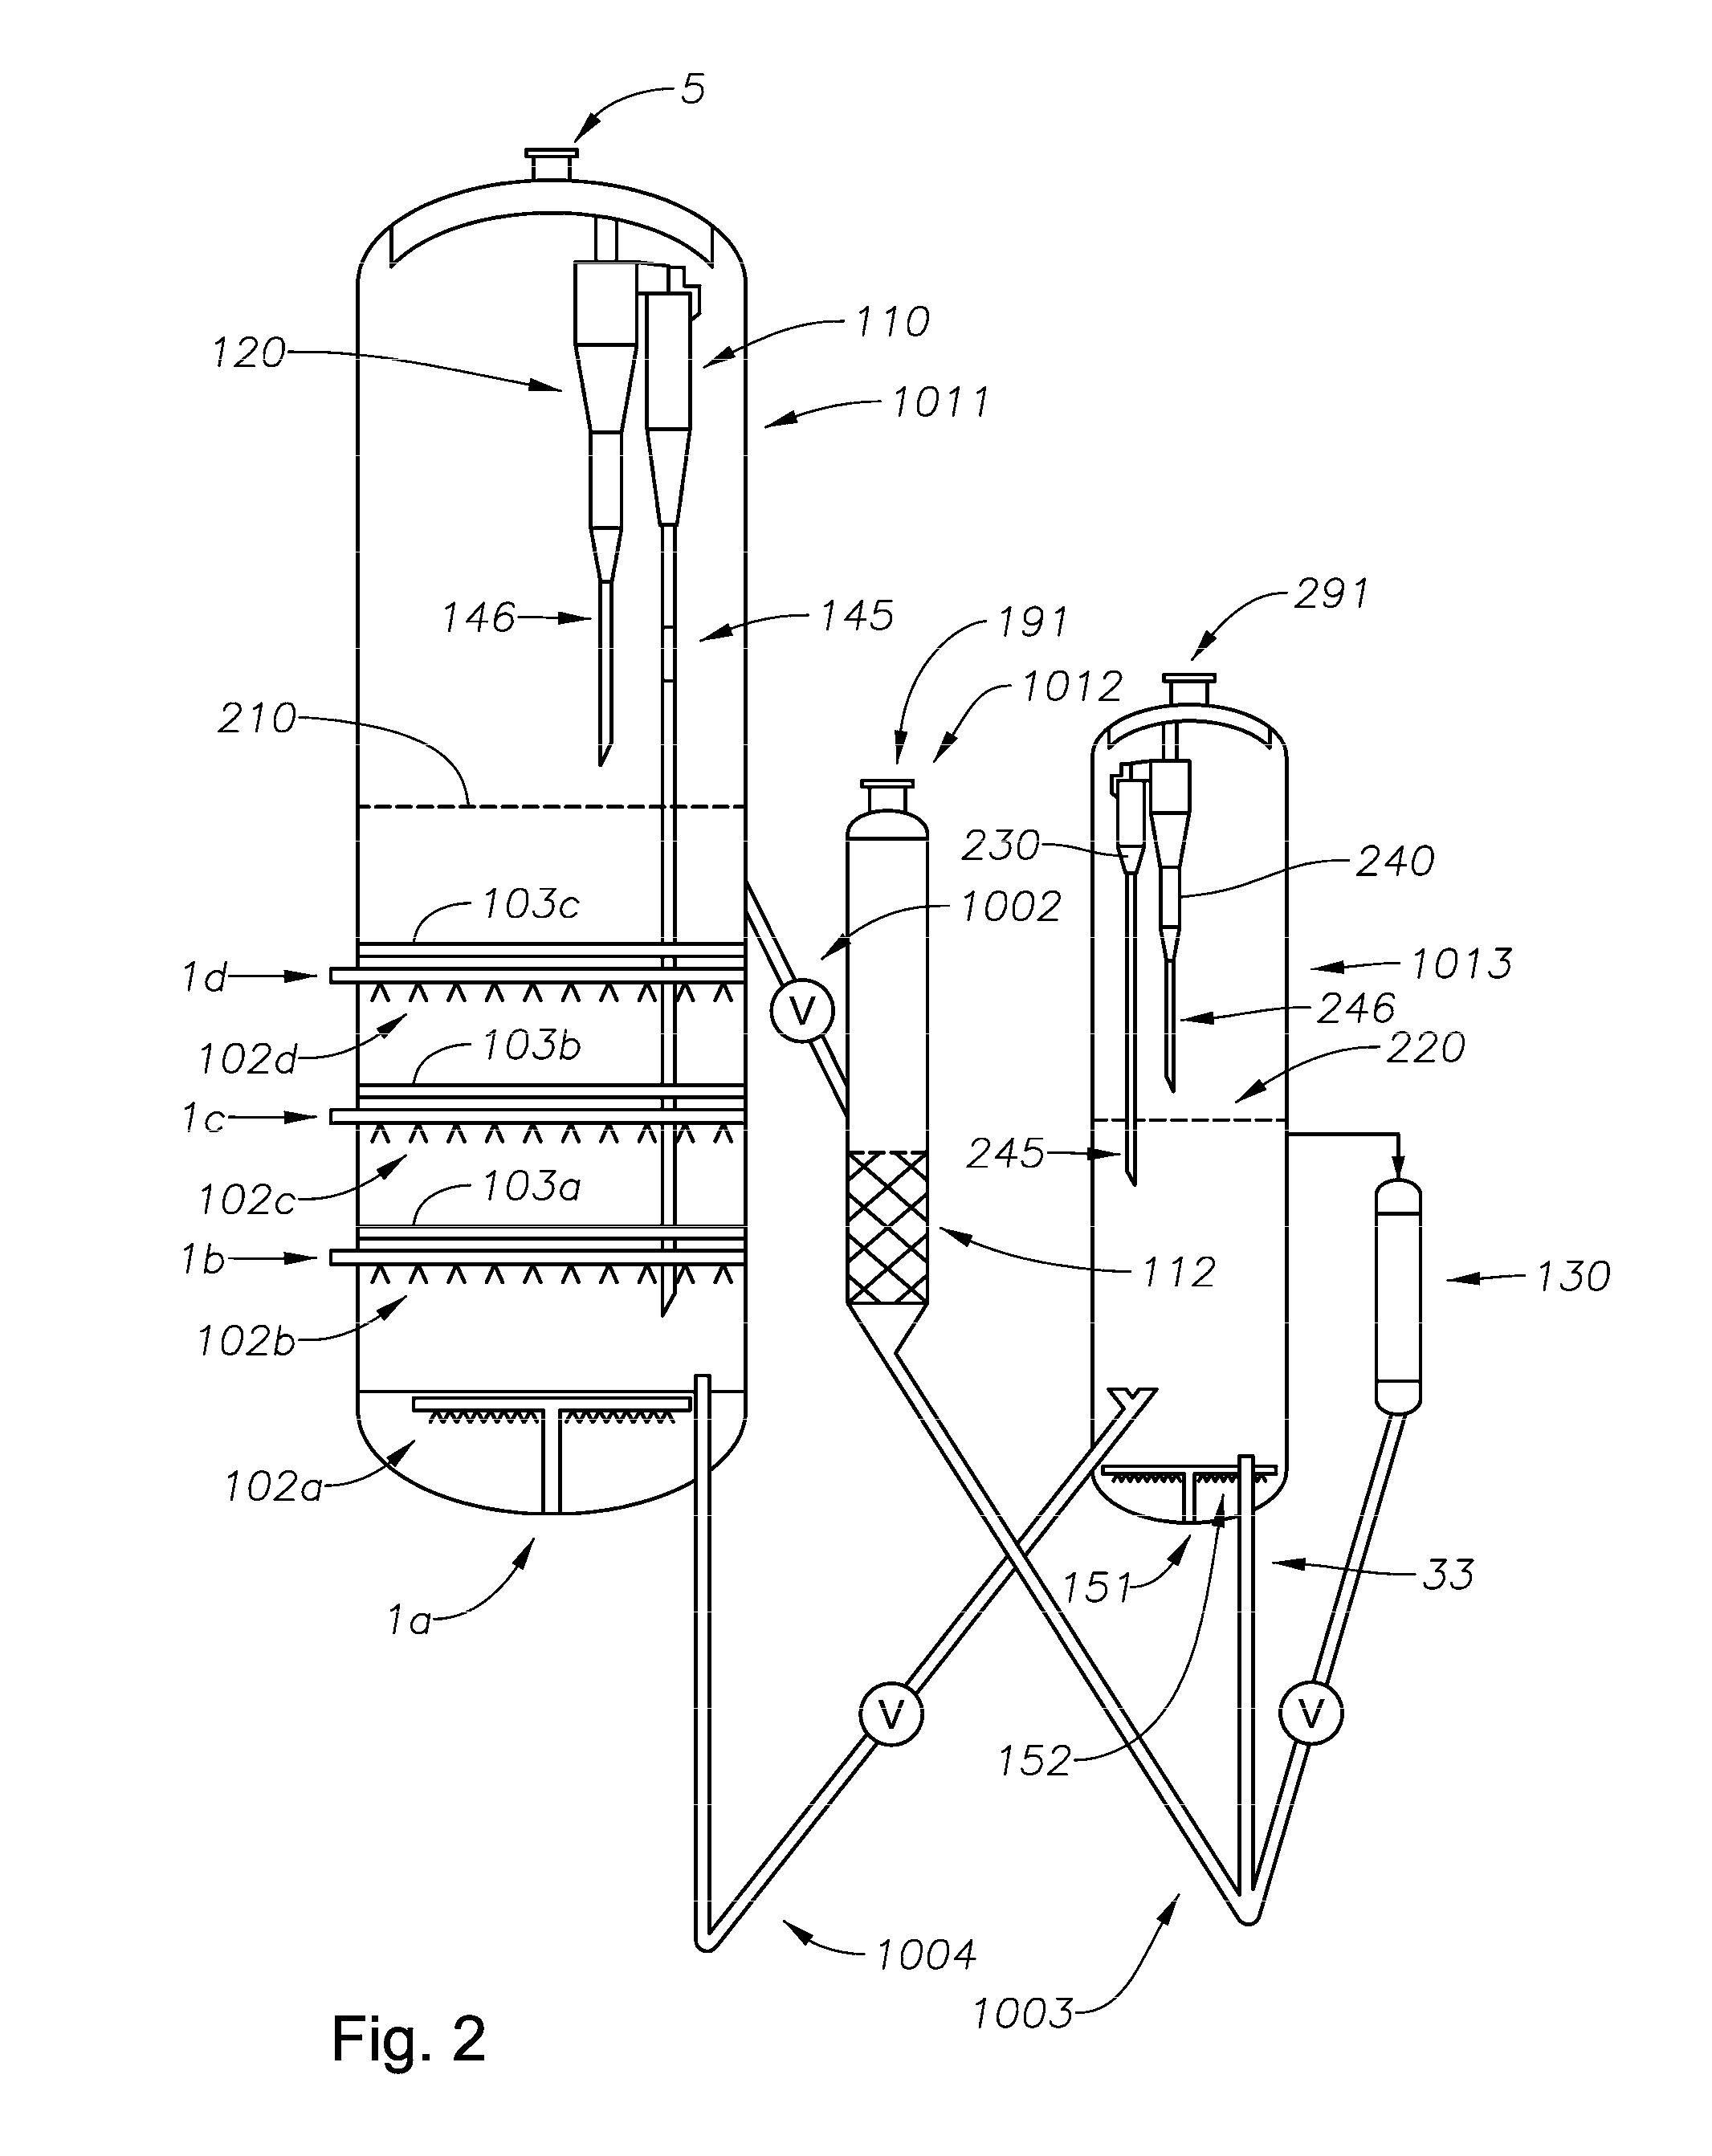 Fluid bed reactor with staged baffles